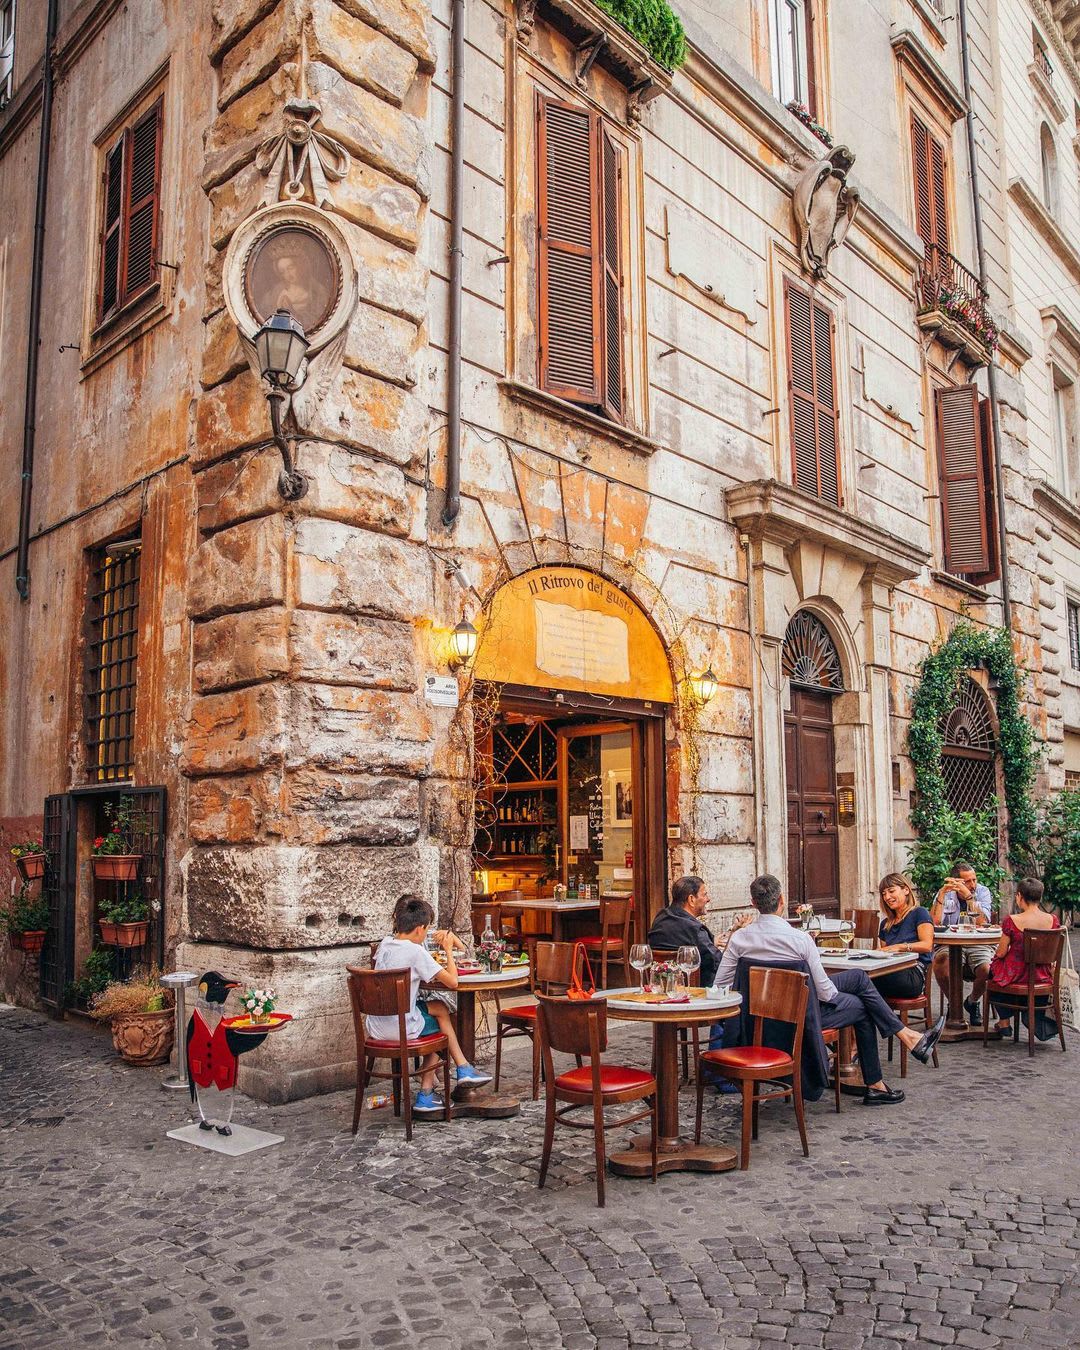 Diners outside a corner restaurant at a cobblestone street in Rome, Italy.